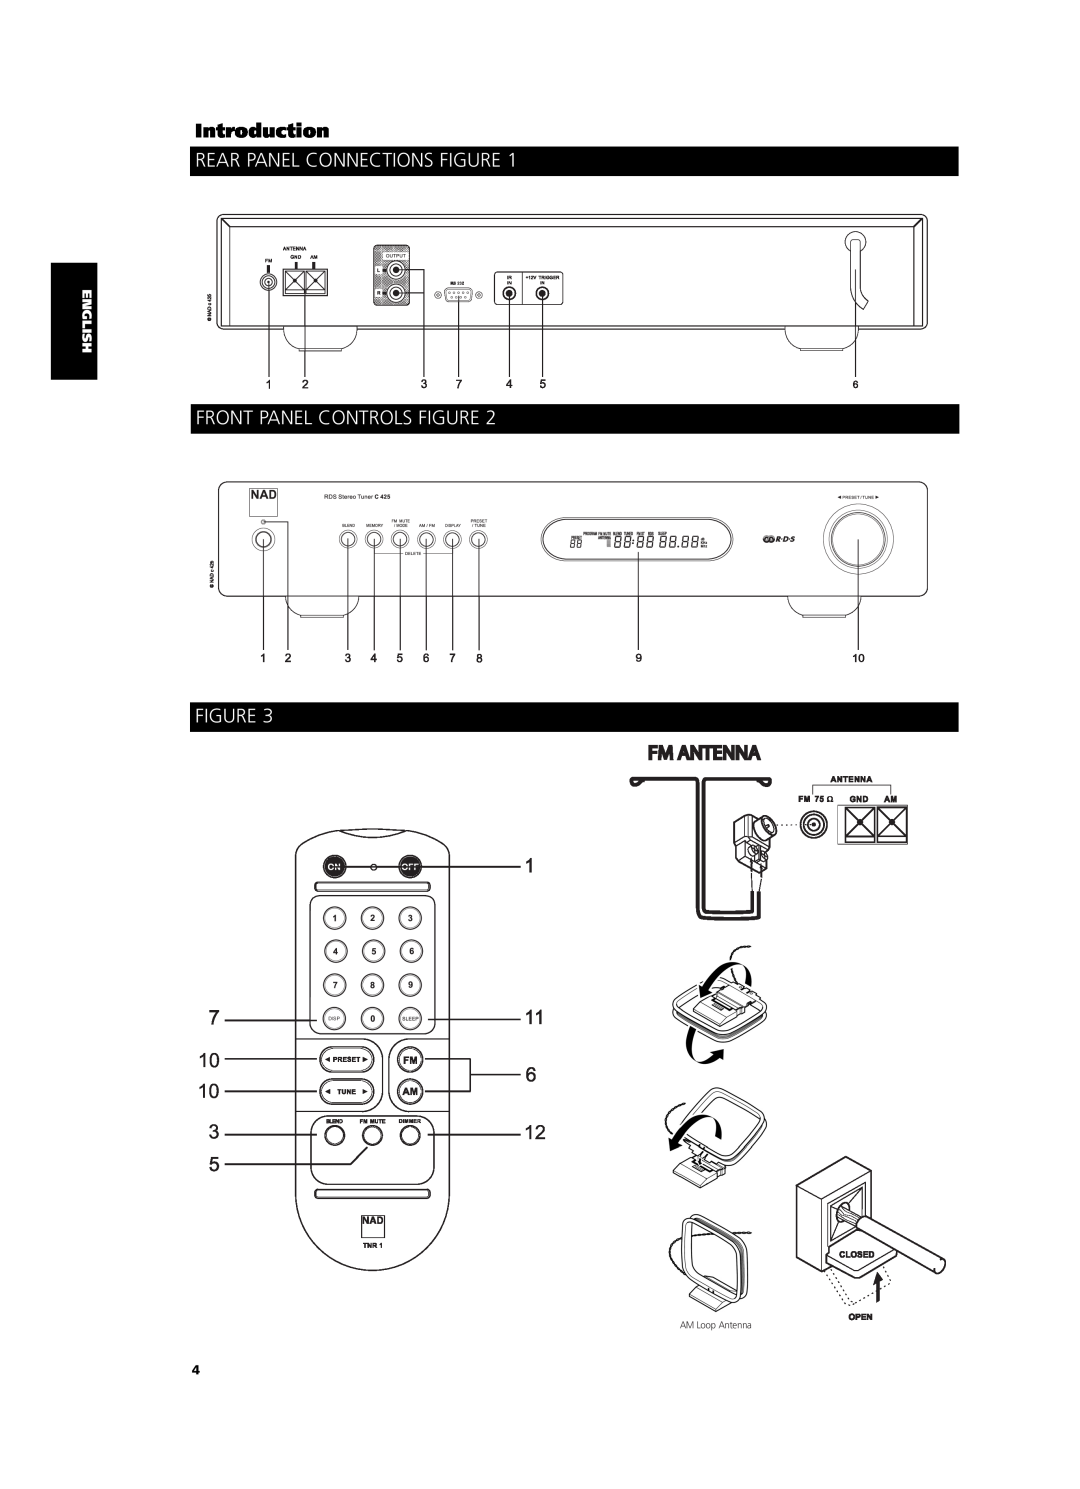 NAD C 425 Rear Panel Connections Figure, Front Panel Controls Figure Figure, Introduction, Fm Antenna, Disp, Blend 